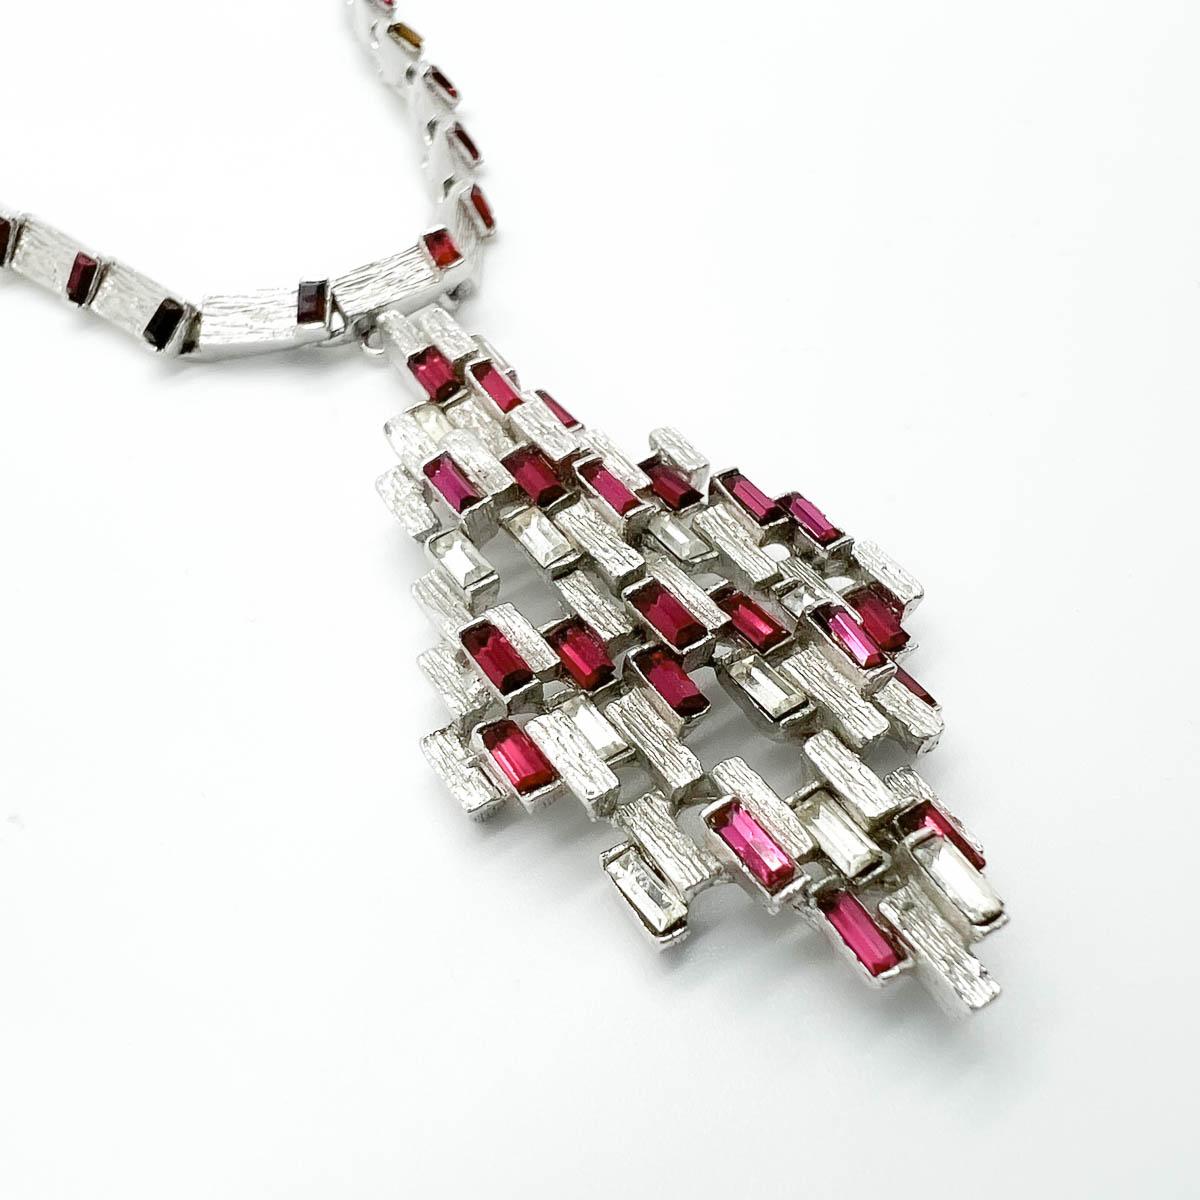 A Vintage Modernist Ruby Necklace. A stunning design embellished with wonderfully rich pink ruby baguettes delivers a timeless piece with attitude. 
An unsigned beauty. A rare treasure. Just because a jewel doesn’t carry a designer name, doesn’t